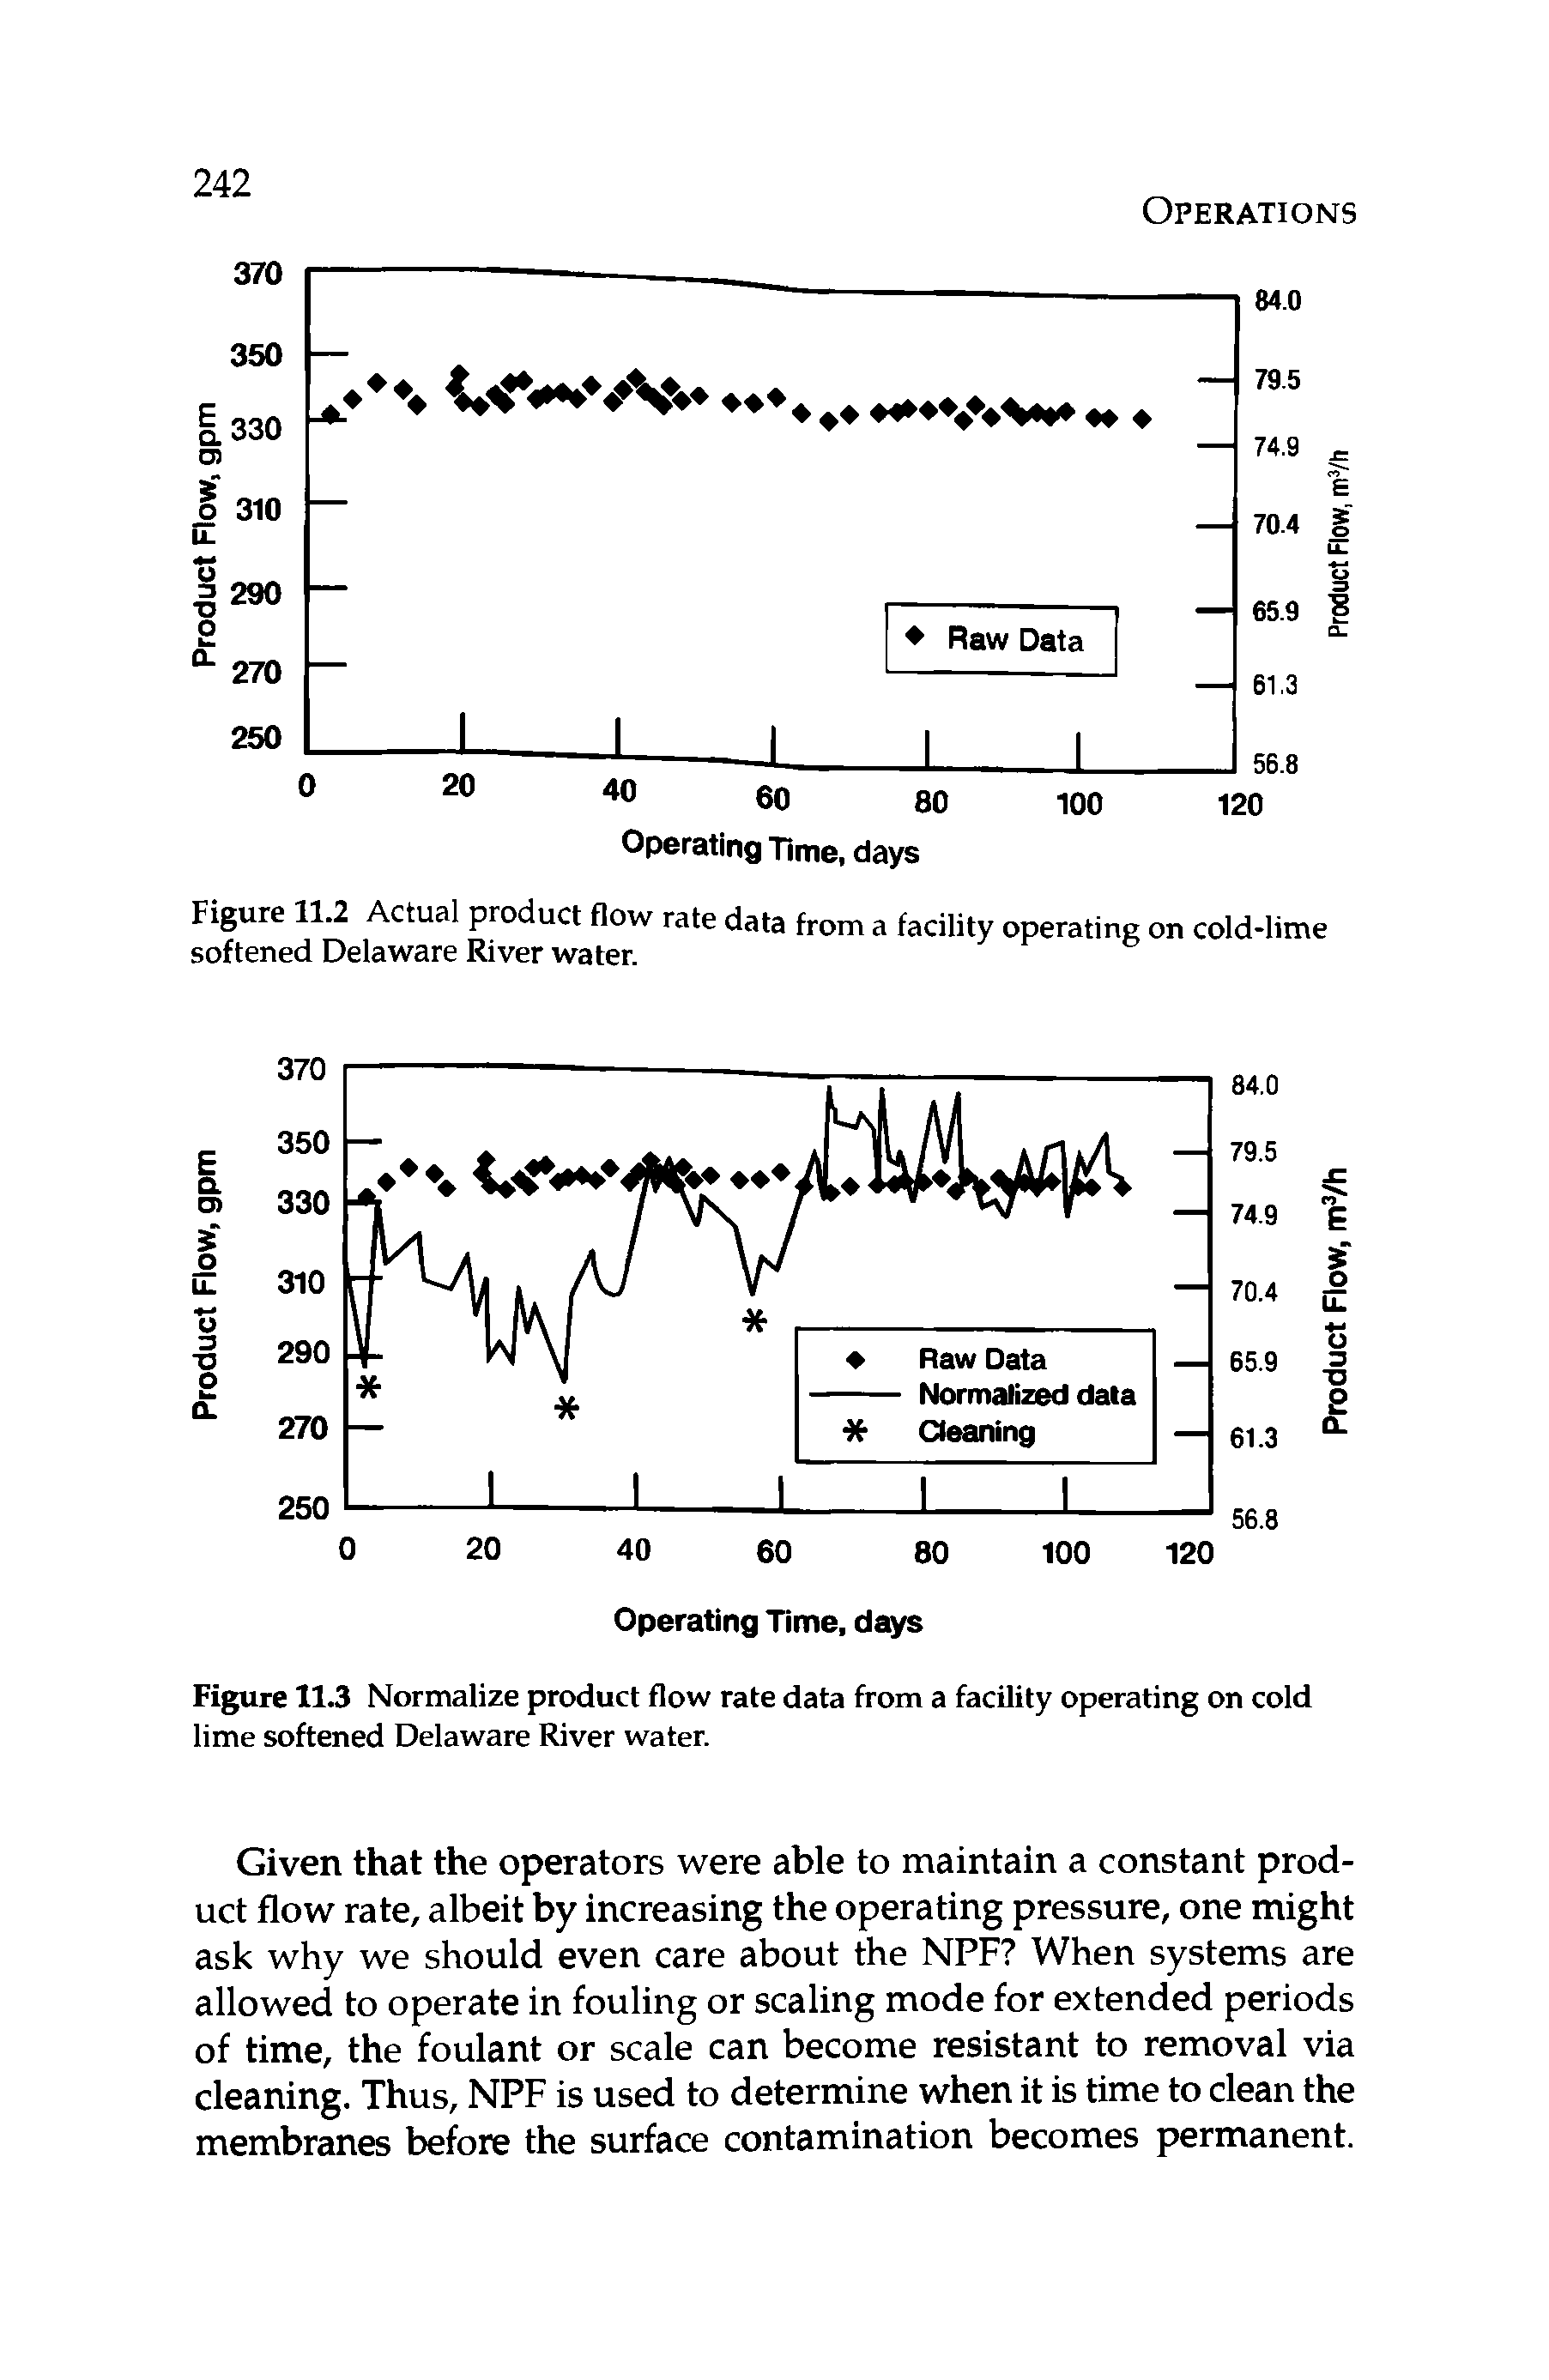 Figure 11.2 Actual product flow rate data from a facility operating on cold-lime softened Delaware River water.